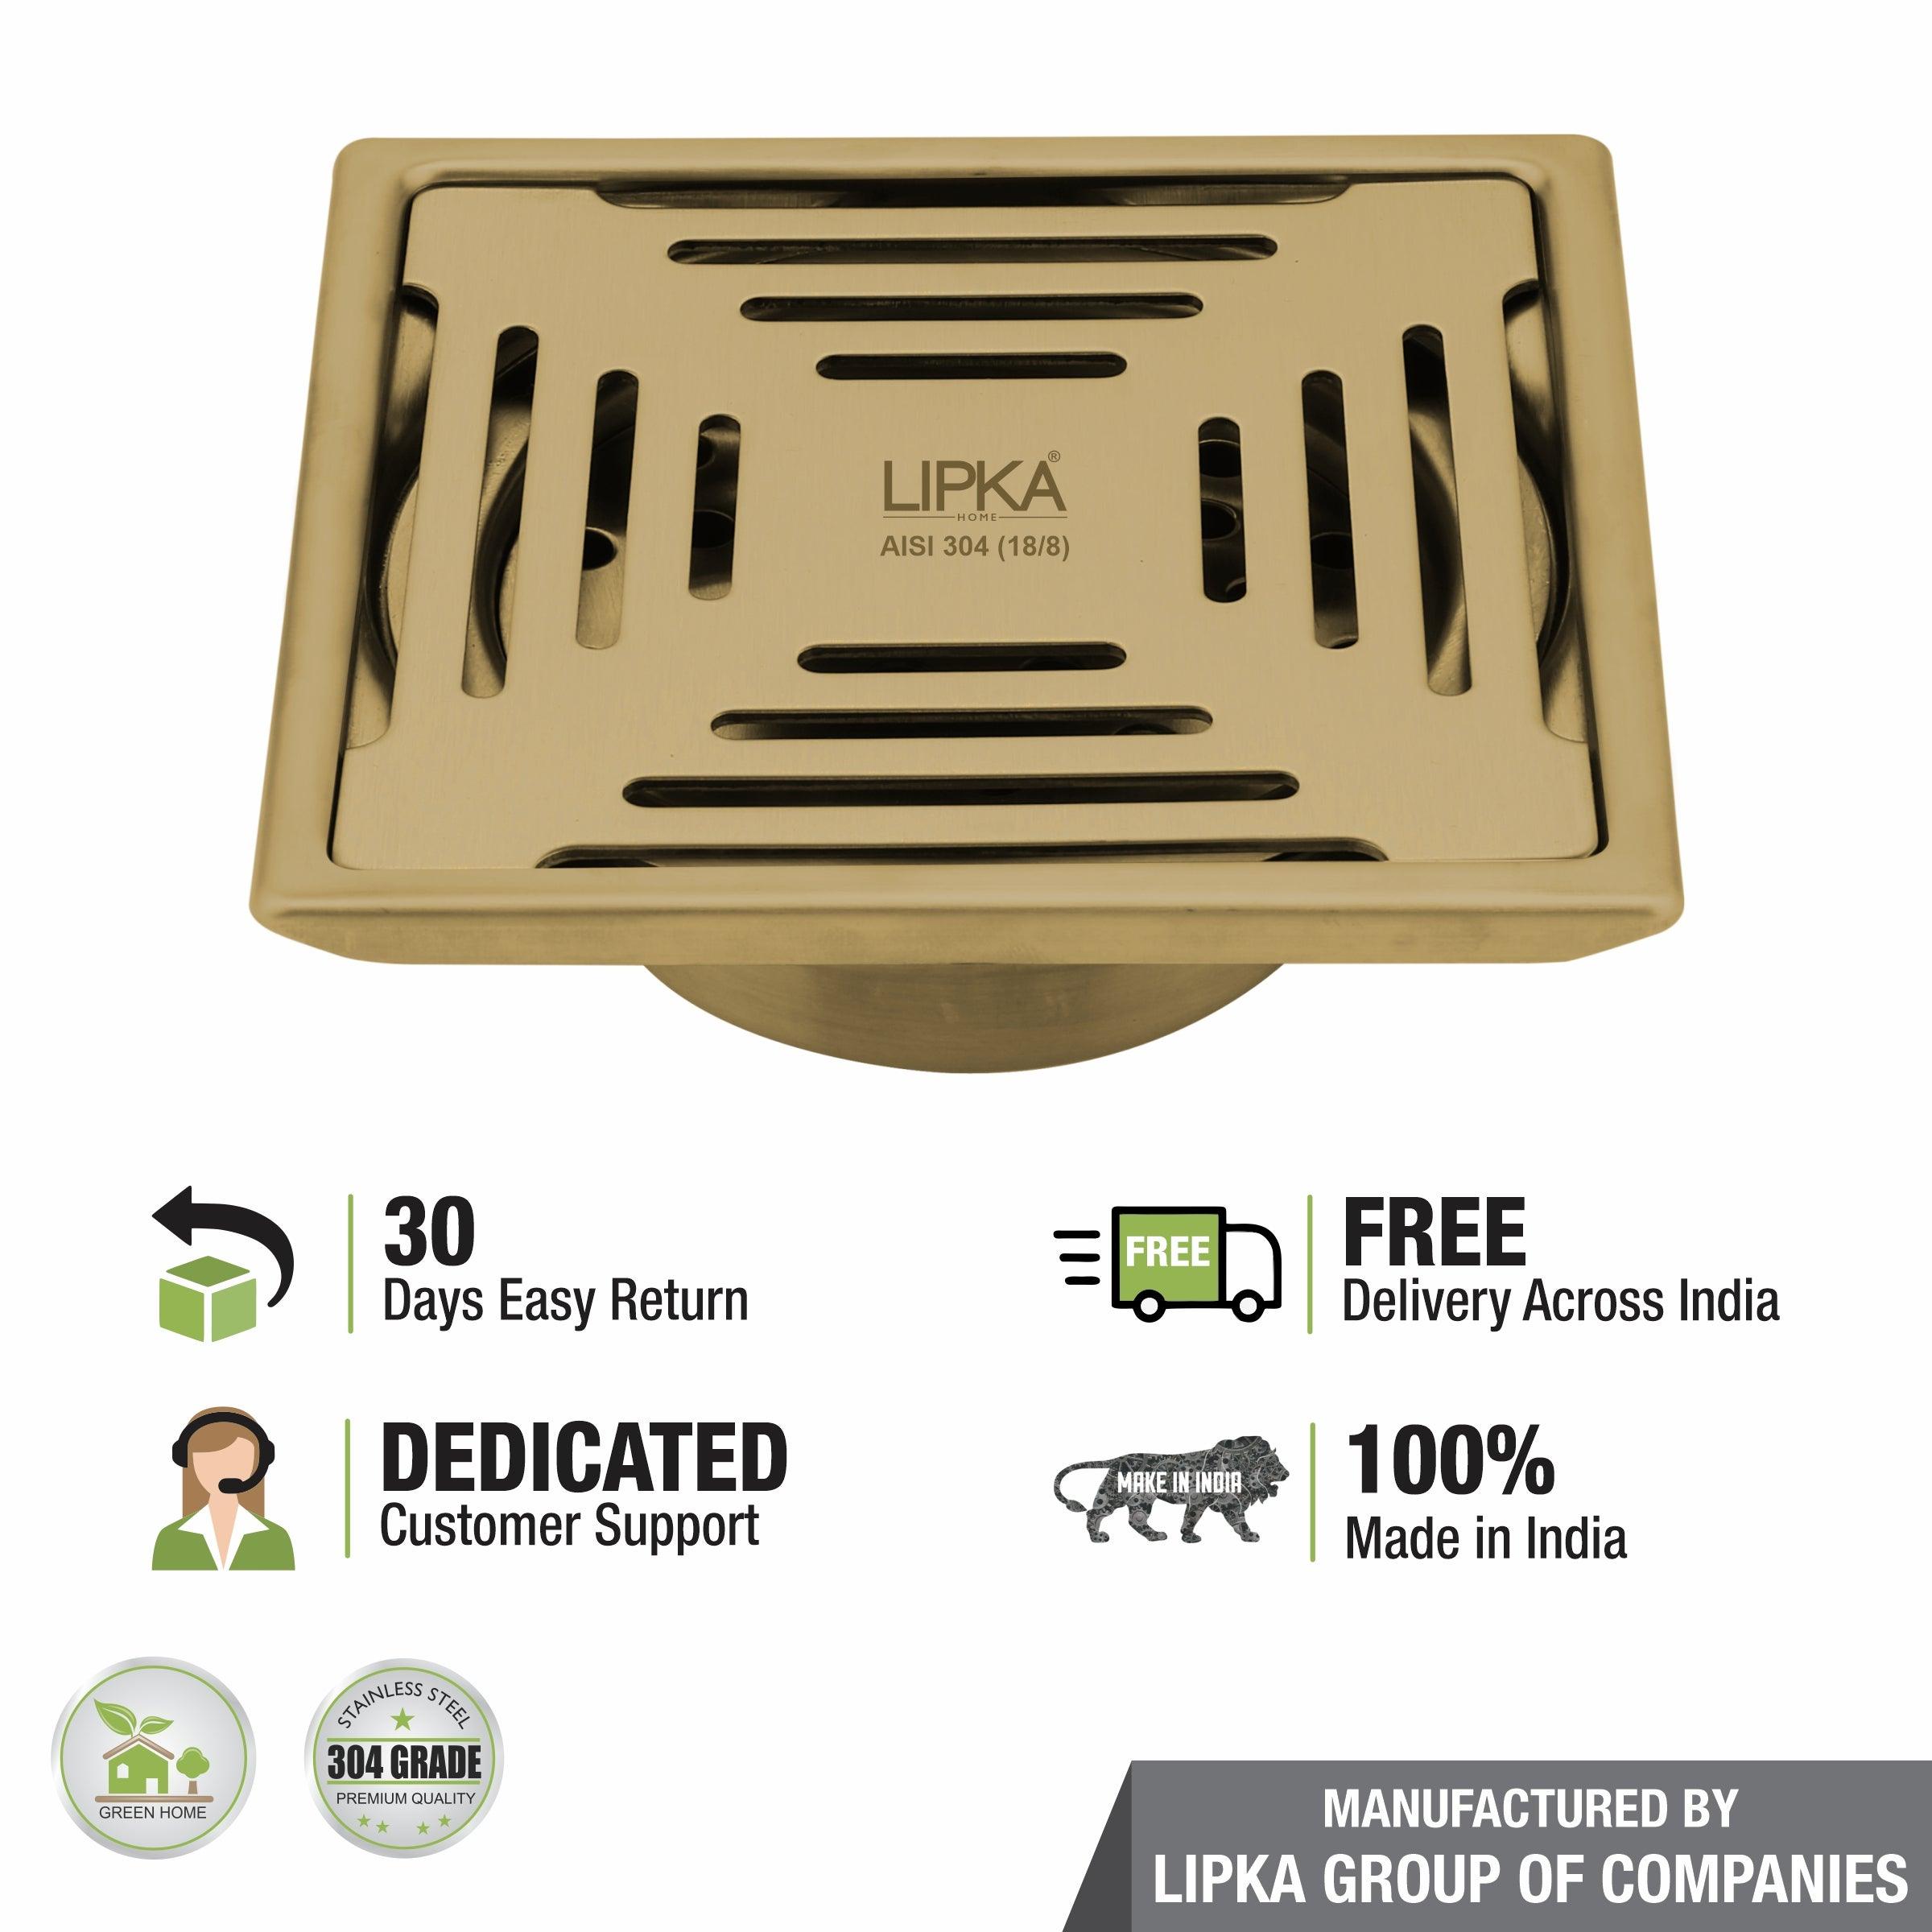 Green Exclusive Square Floor Drain in Yellow Gold PVD Coating (5 x 5 Inches) with Cockroach Trap - LIPKA - Lipka Home